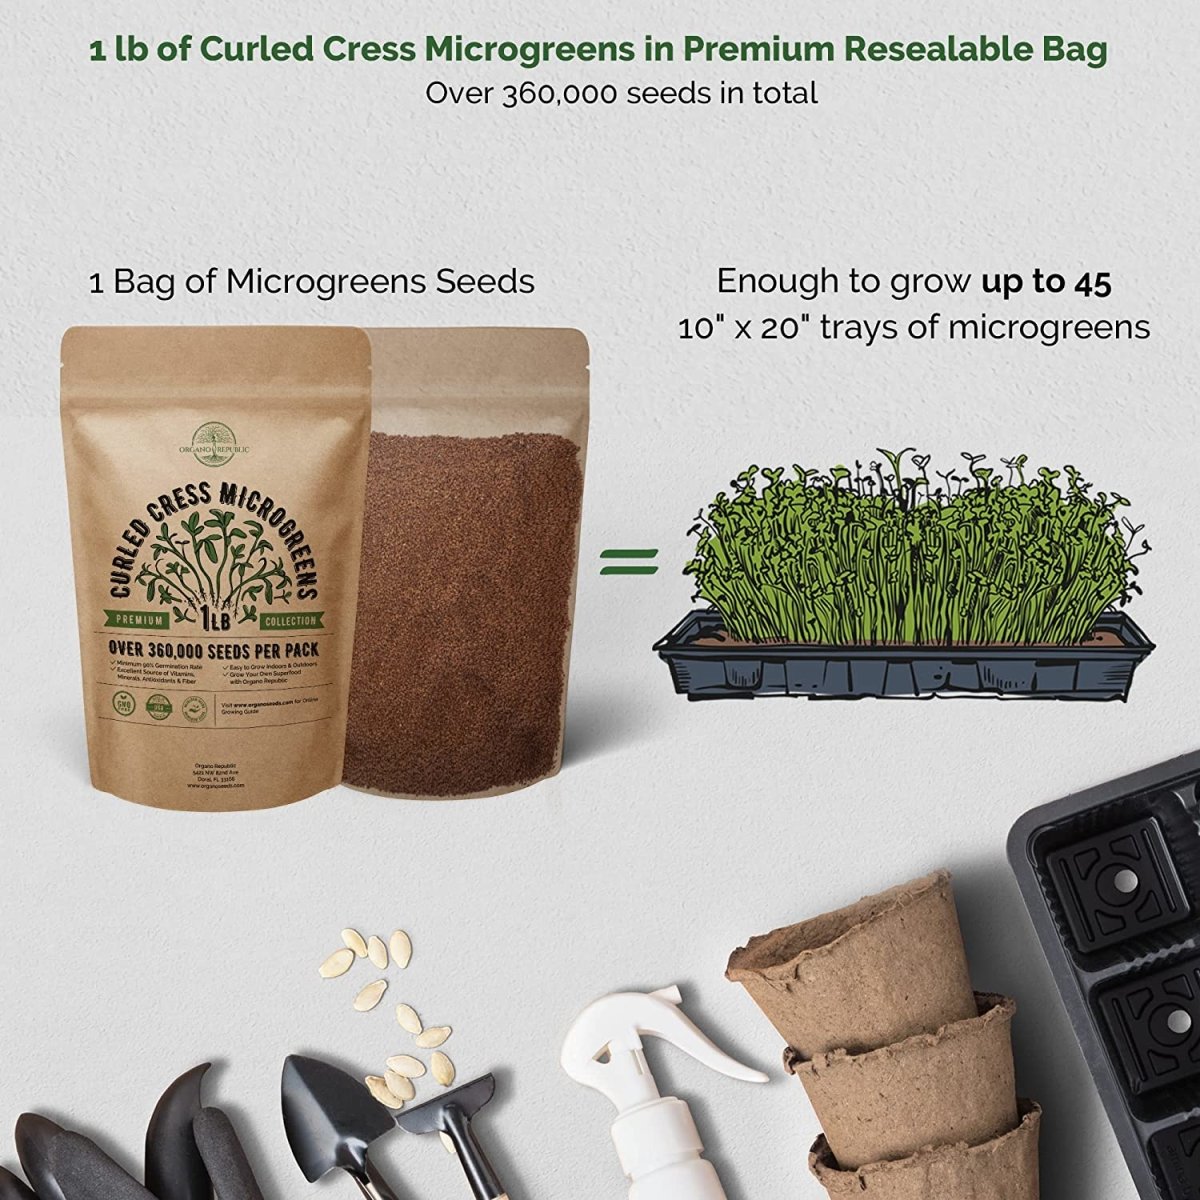 Cress Microgreens & 20 Most Popular Vegetables Seeds Bundle Non-GMO Heirloom Seeds for Planting Indoor and Outdoor Over 361,300 Microgreen & Vegetables Seeds in One Value Bundle - Organo Republic